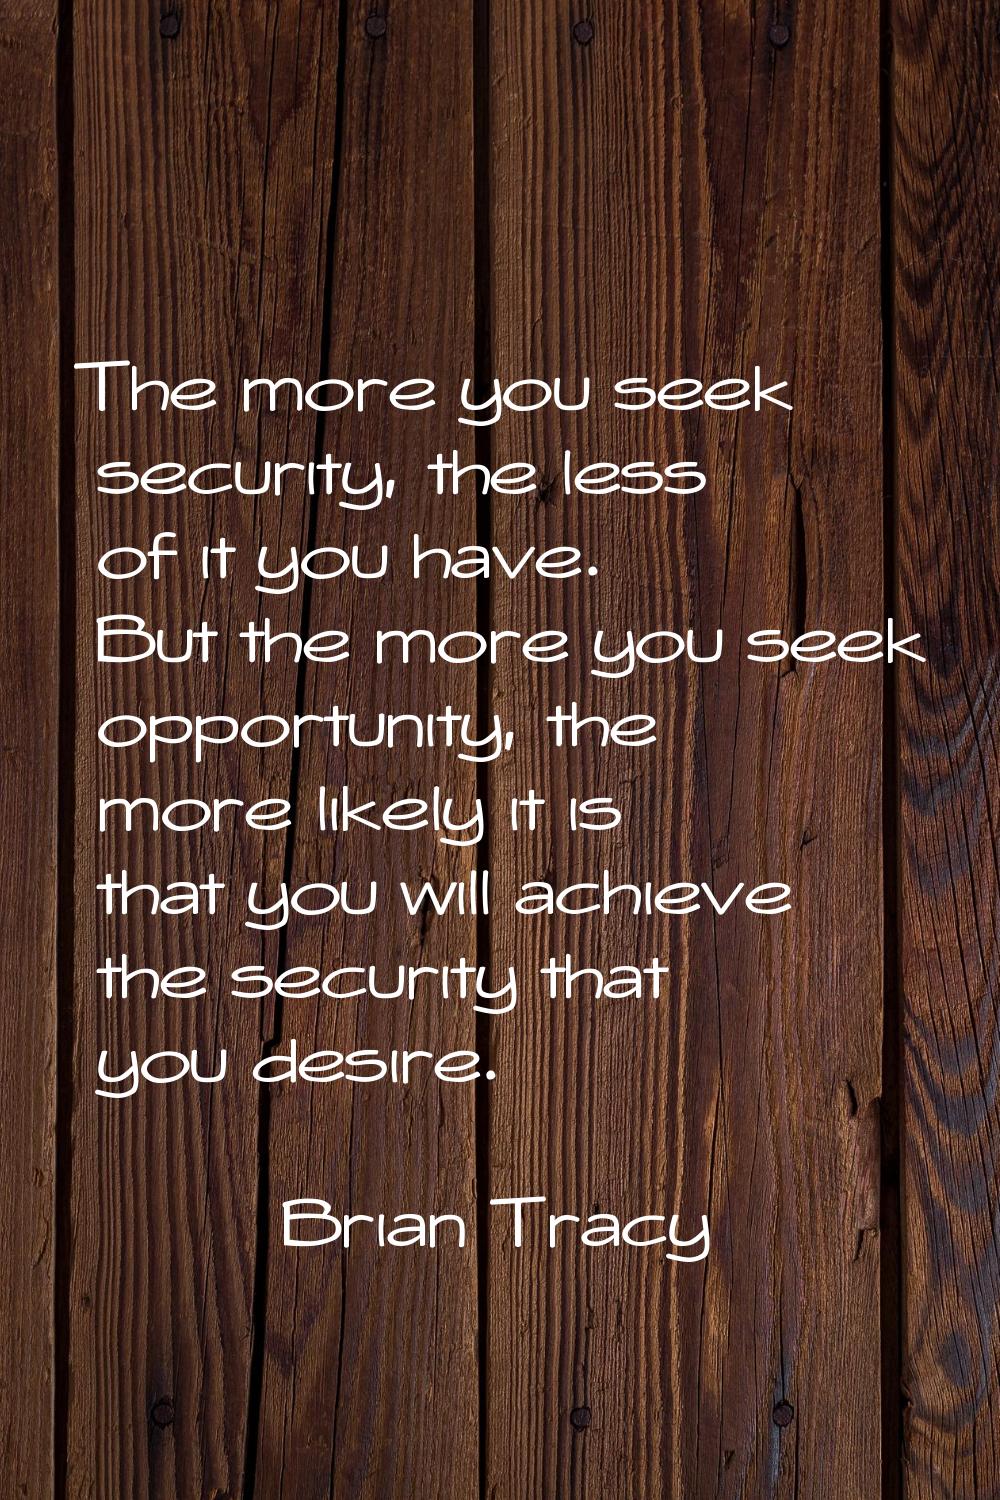 The more you seek security, the less of it you have. But the more you seek opportunity, the more li